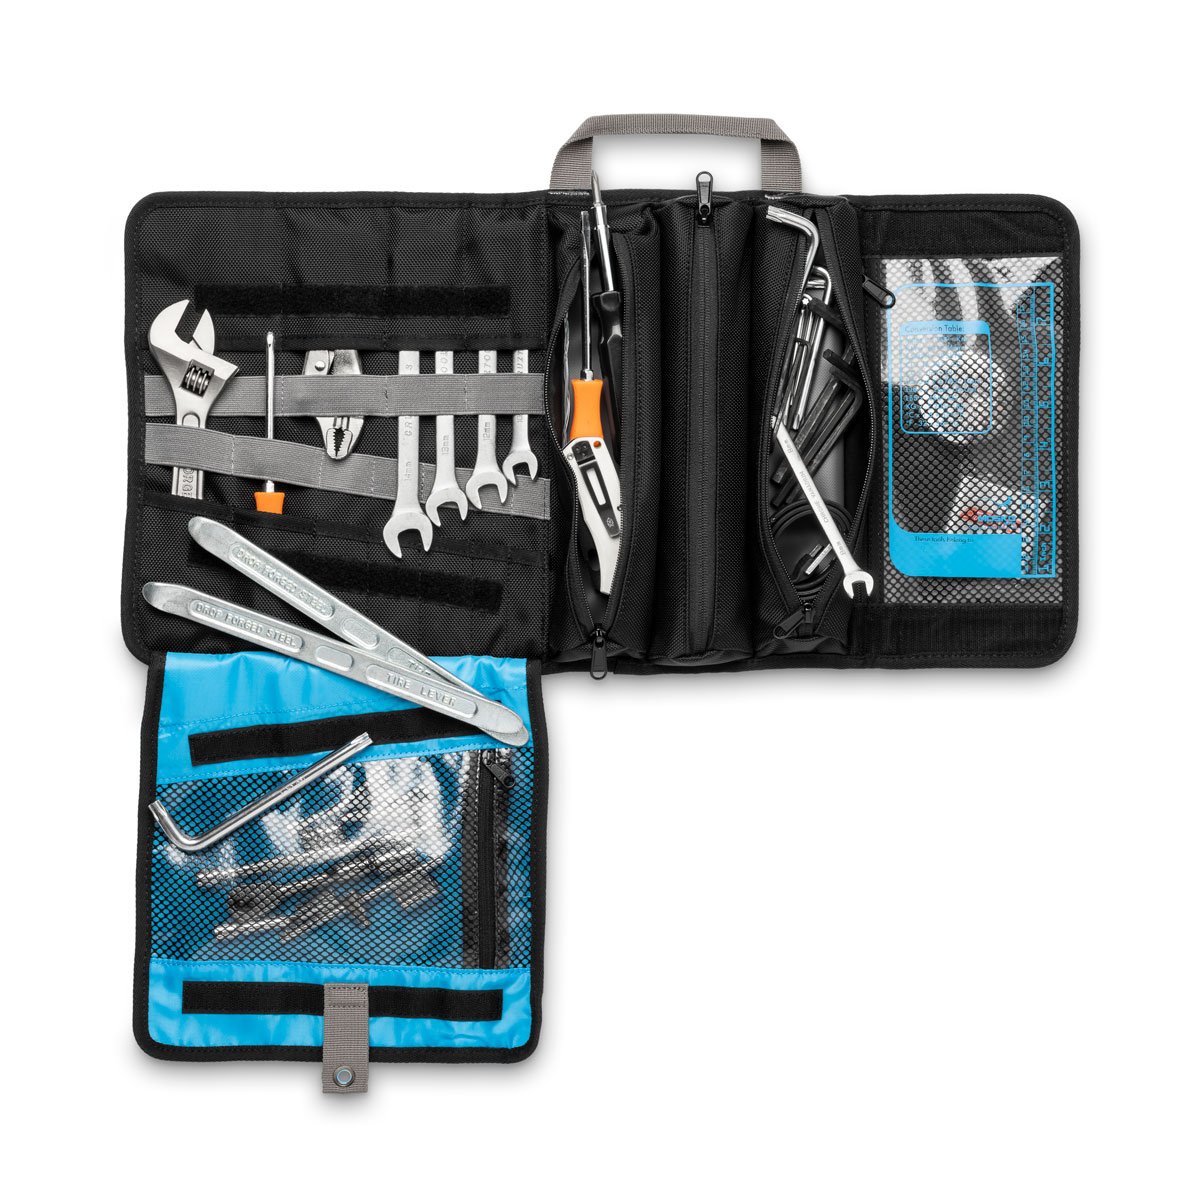 2 Pack Heavy Duty Roll Up Tool Bag Organizer With 6 Tool Pouches